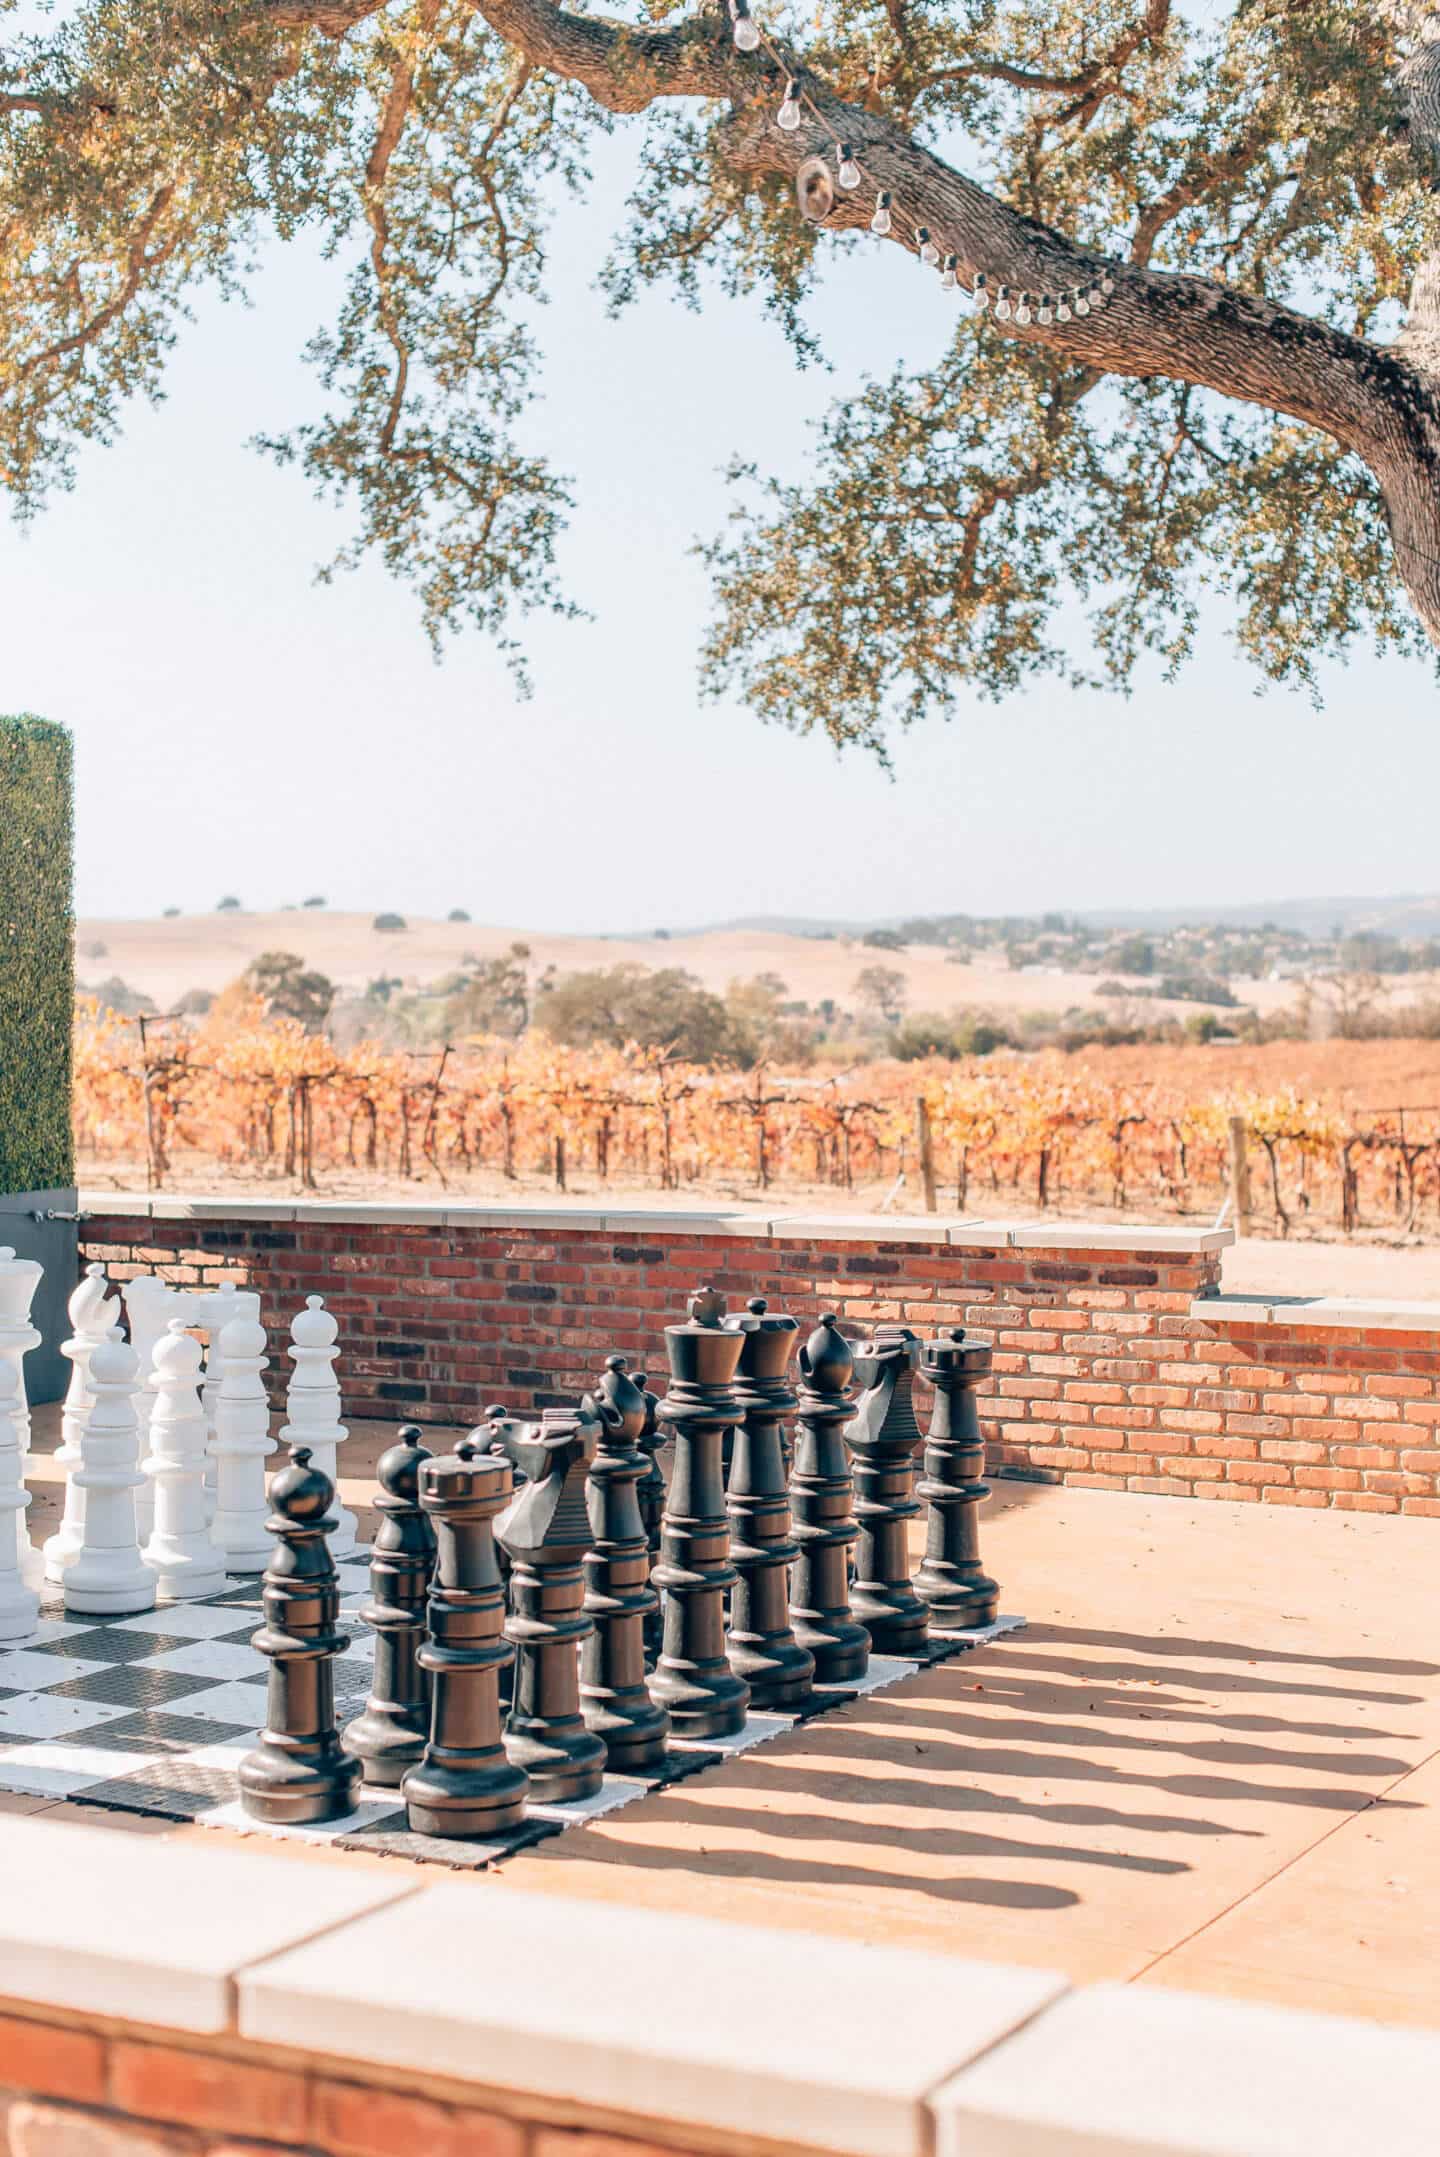 Best Paso Robles wineries, by travel blogger What The Fab